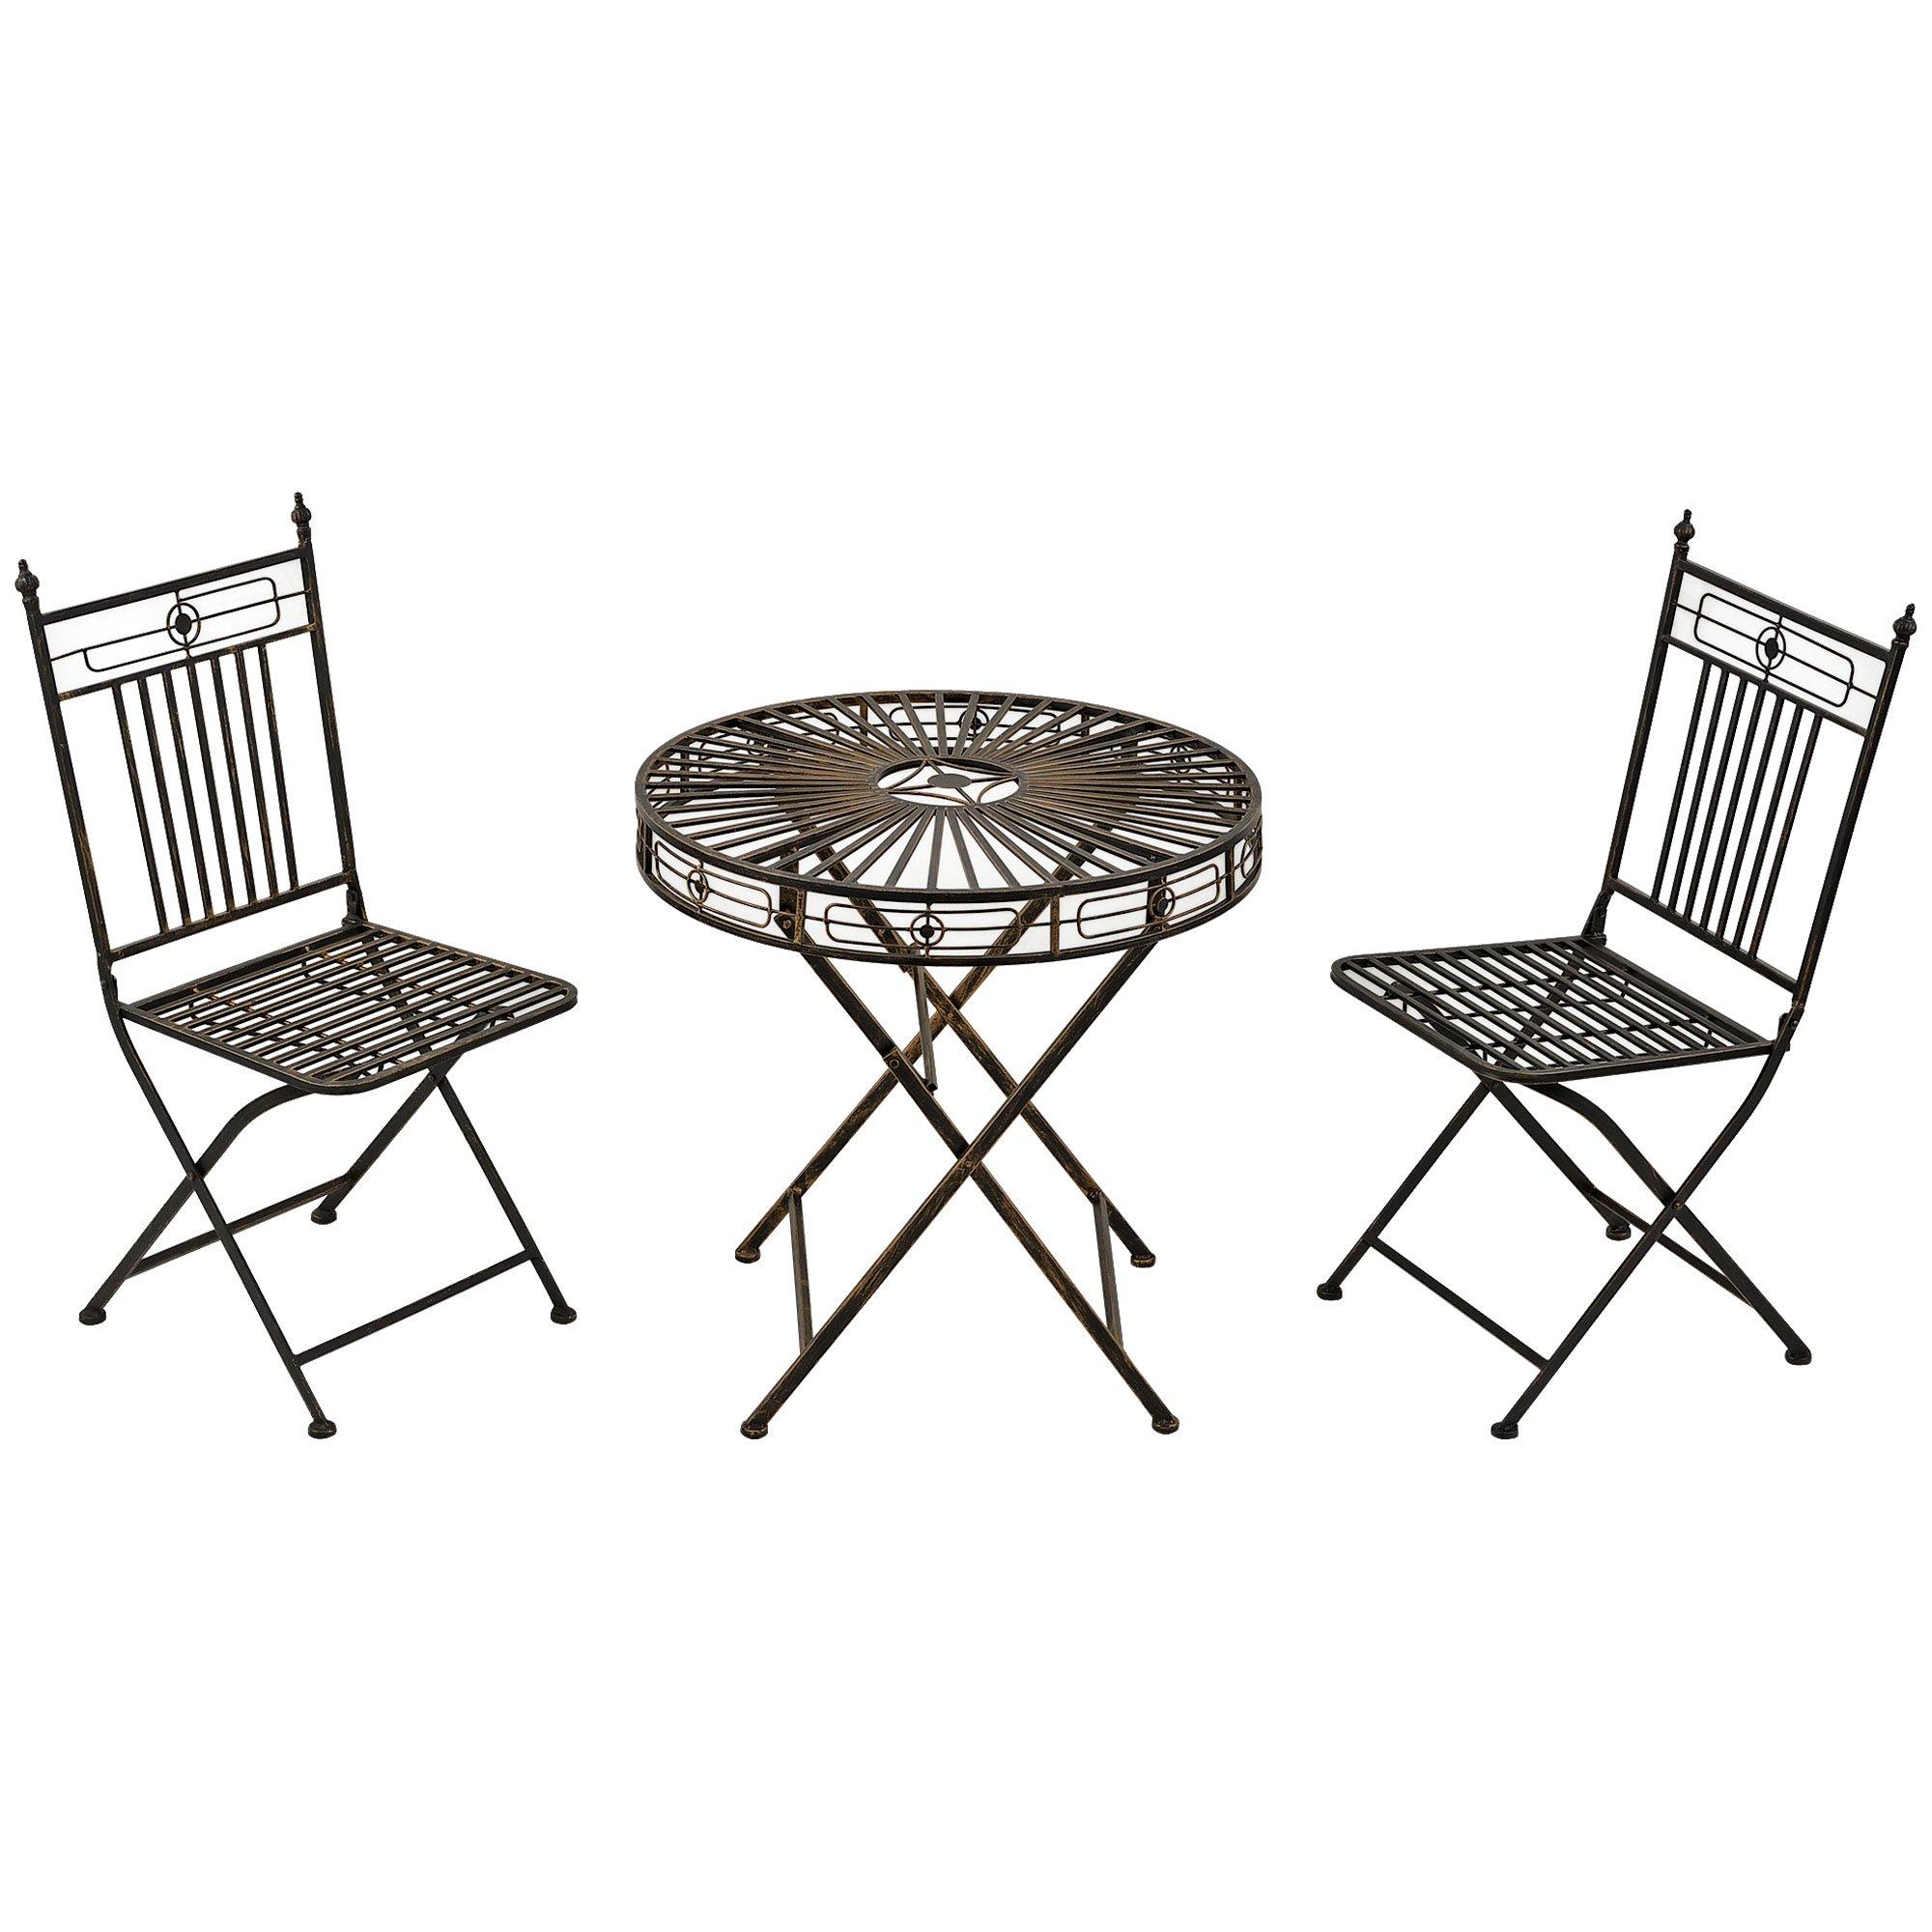 3PCs Garden Bistro Set with 2 Folding Chair and 1 Table